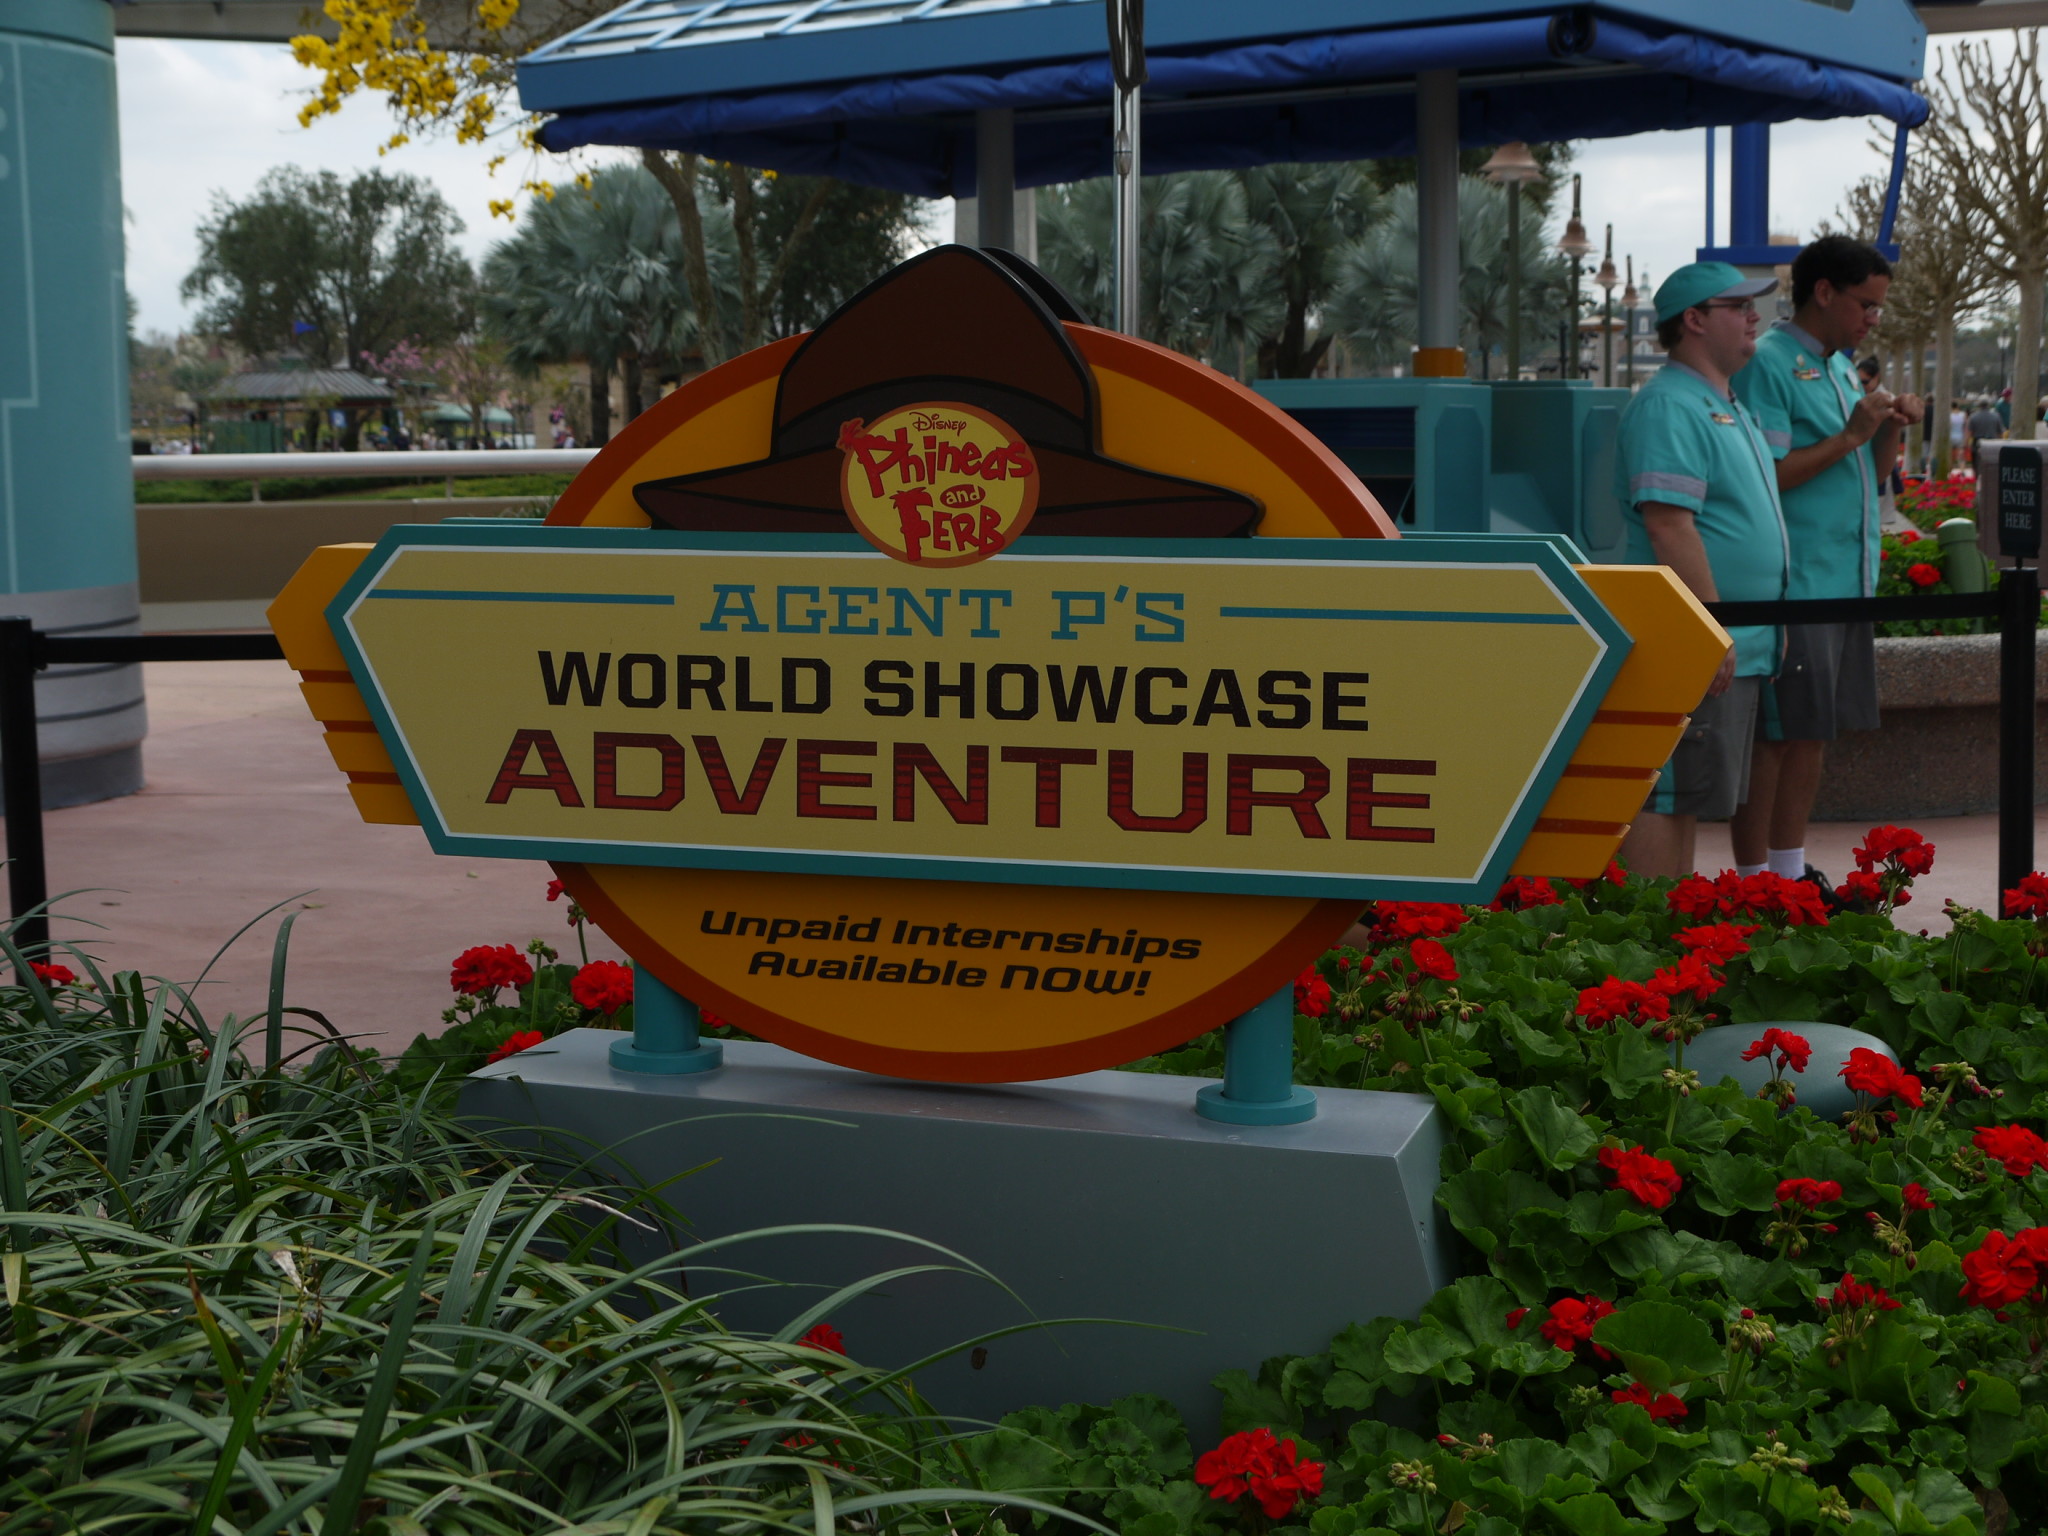 Agent P’s World Showcase Adventure is Getting an Update